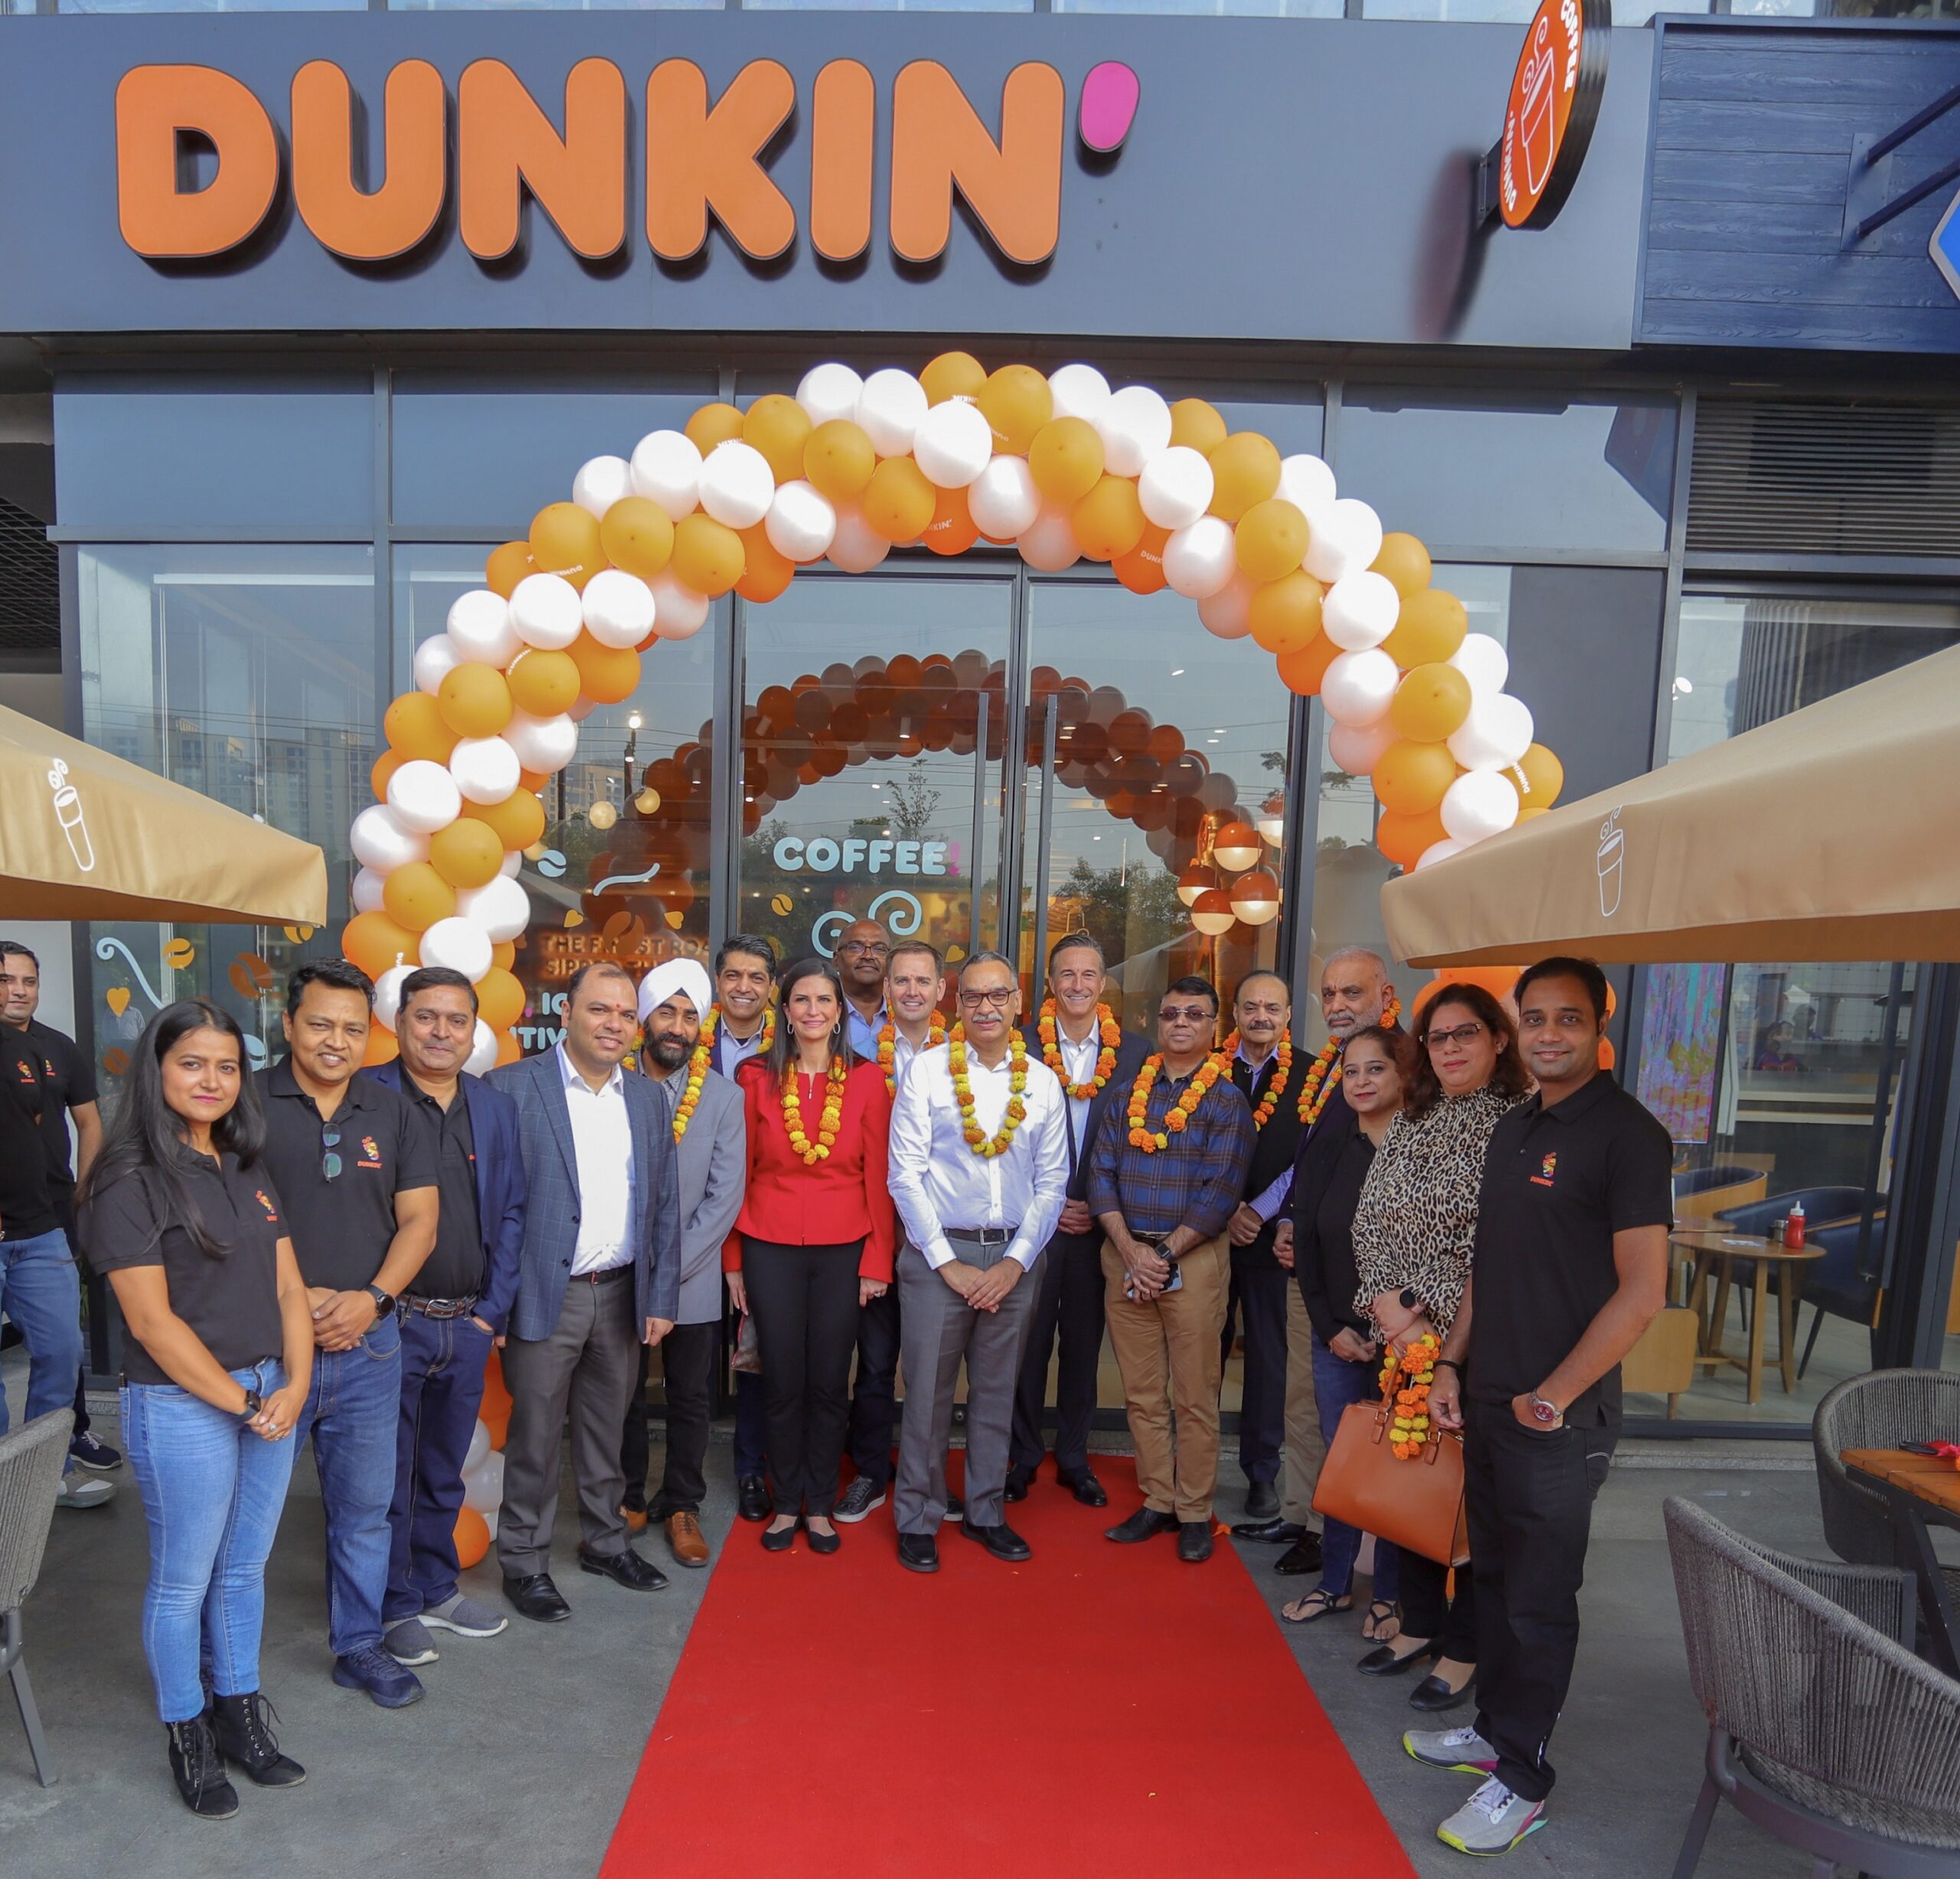 Dunkin’ India re-launches new restaurant design with a new coffee and bakery menu